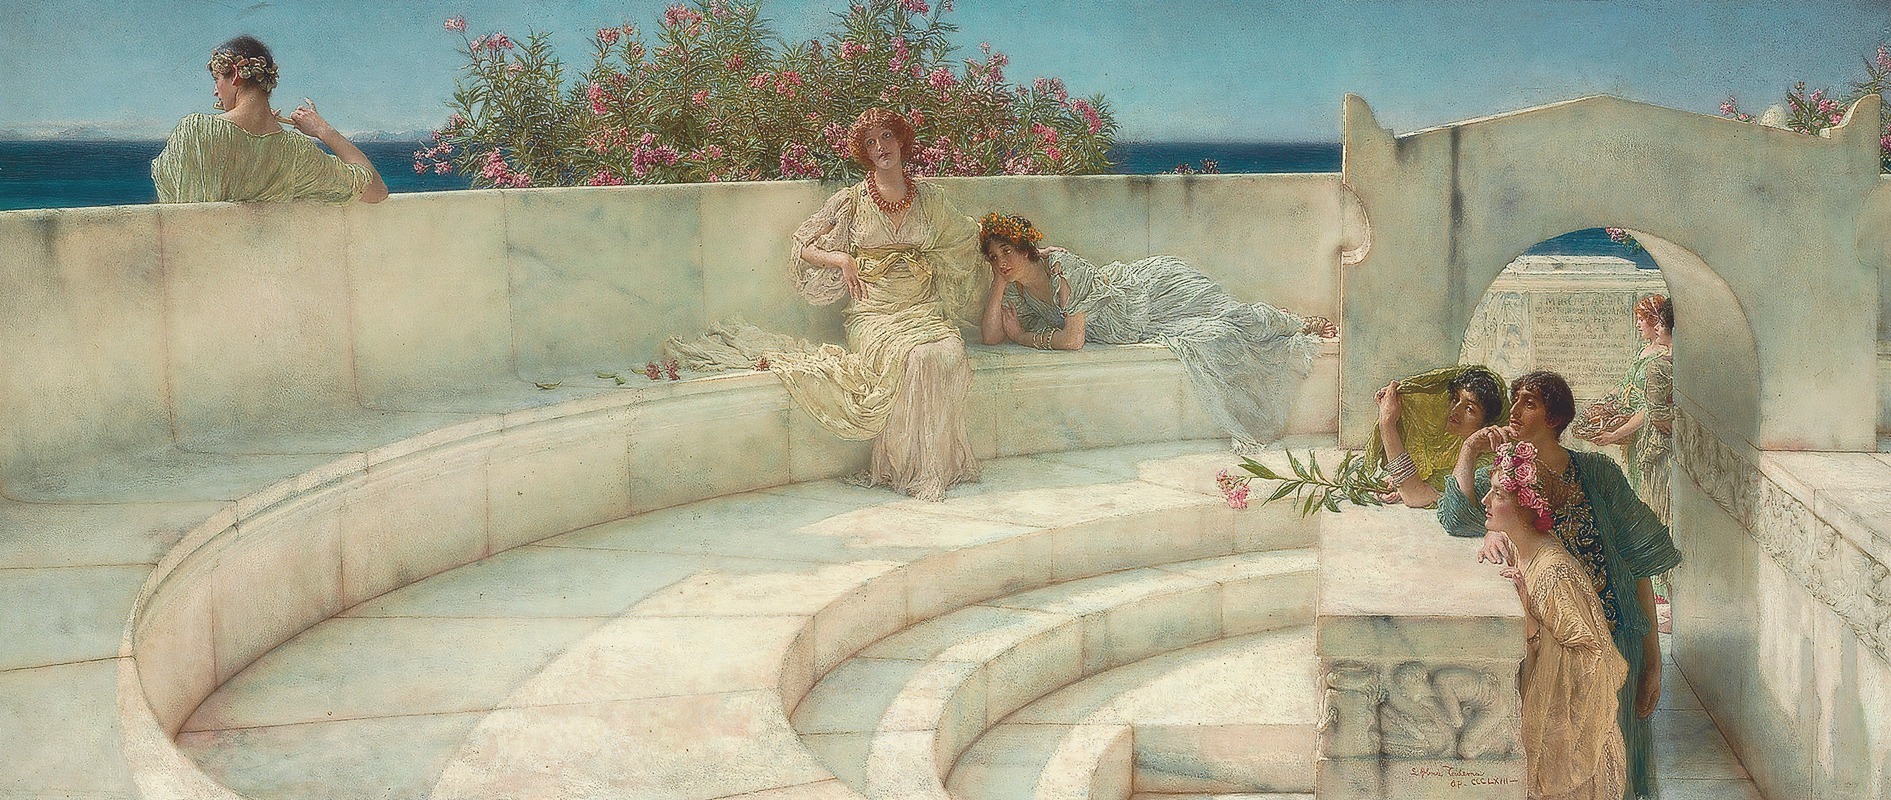 Lawrence Alma-Tadema - Under The Roof Of Blue Ionian Weather